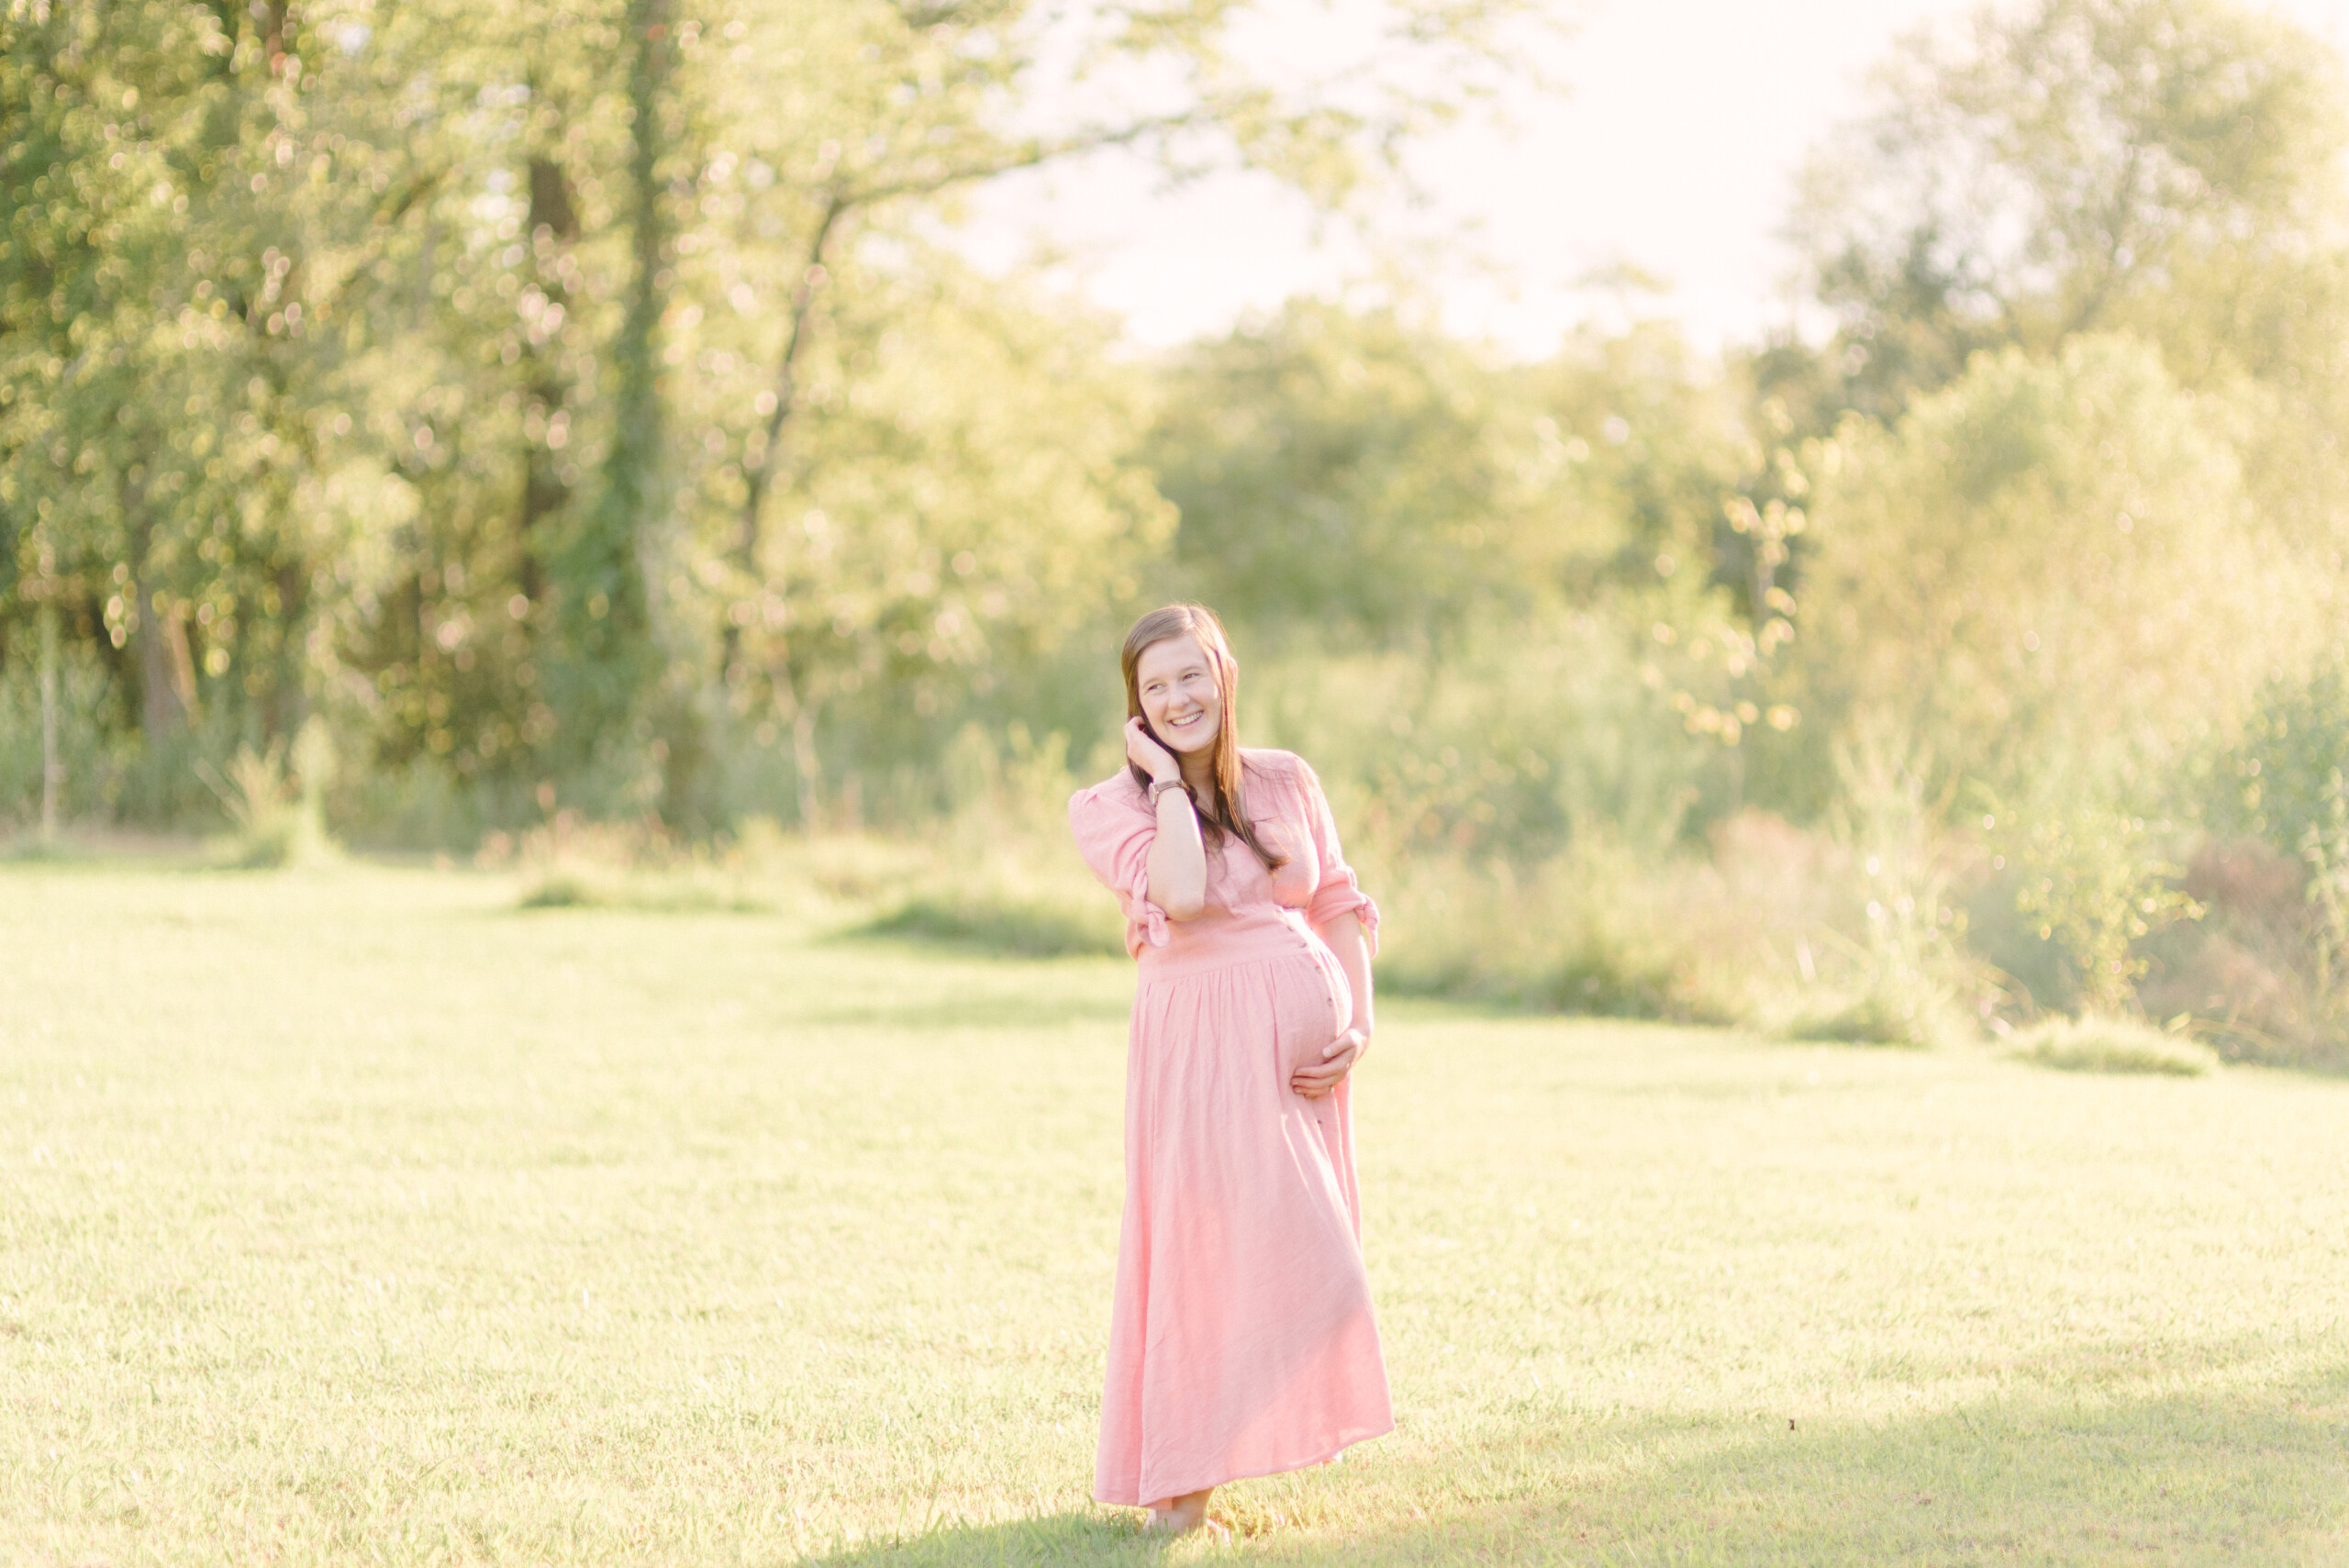 Light & Airy Maternity Session from Lindsey Brown Photography